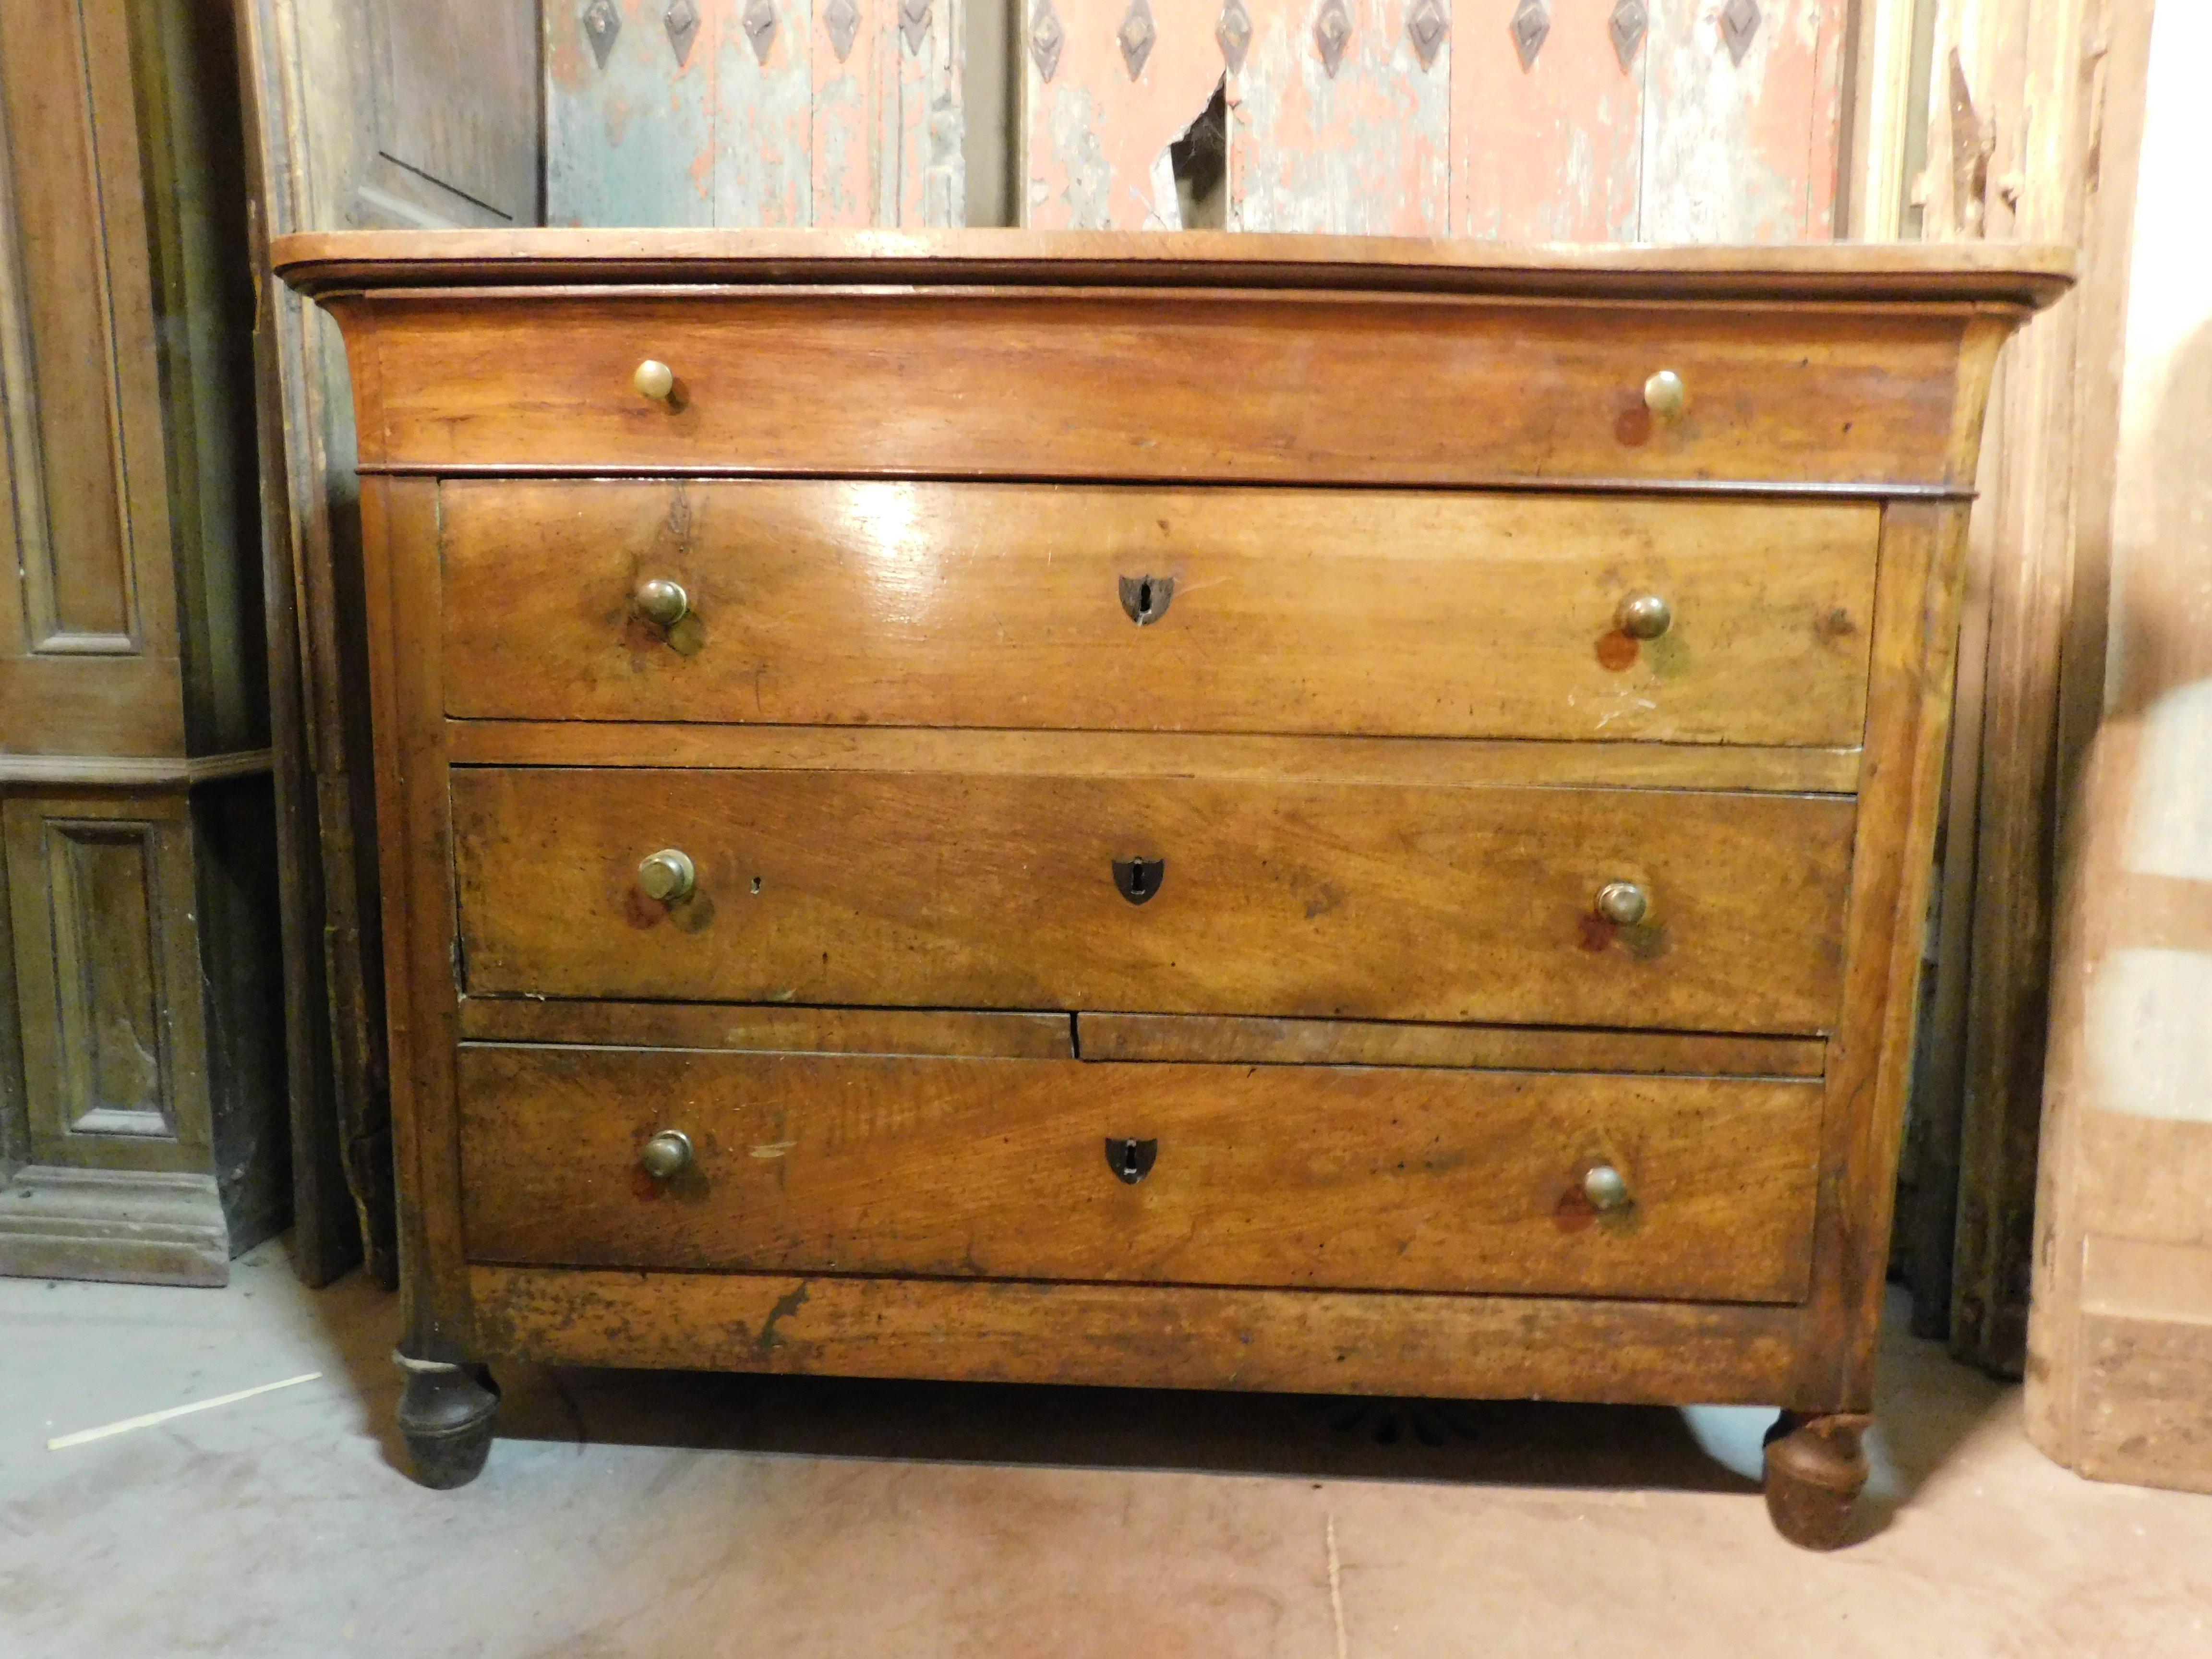 Antique classic chest of drawers in walnut, chest of drawers, with a total of 4 drawers (3 large and one secret type), hand-built in the 19th century, in Italy, all classic and in patinated walnut, beautiful.
Maximum size in cm W 126 x H 96 x D 54.